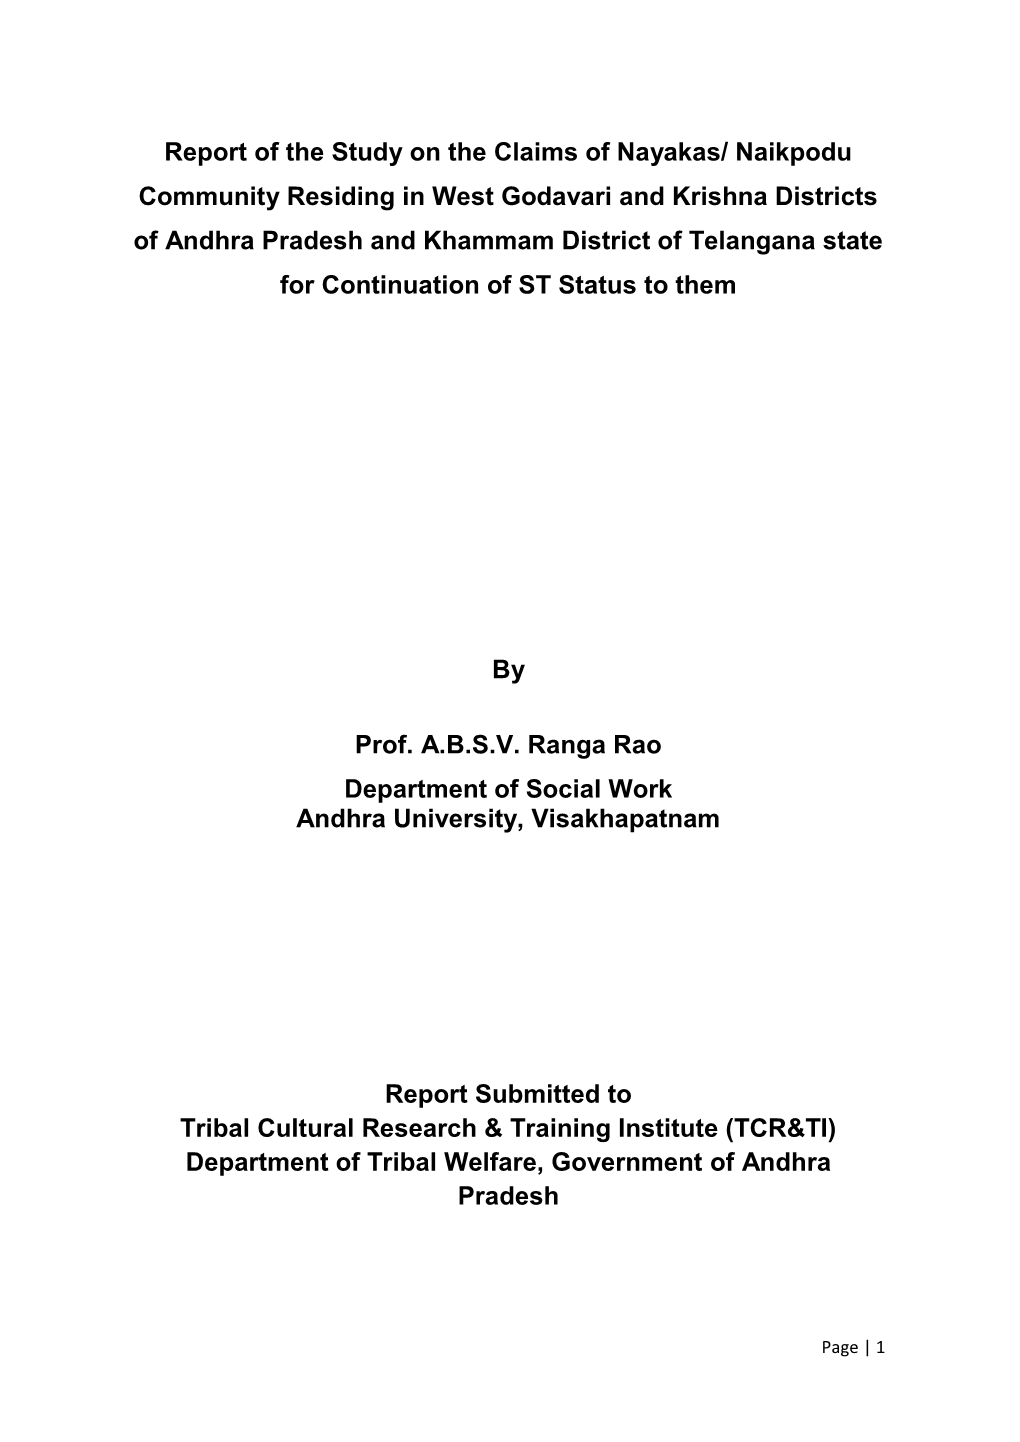 Report of the Study on the Claims of Nayakas/ Naikpodu Community